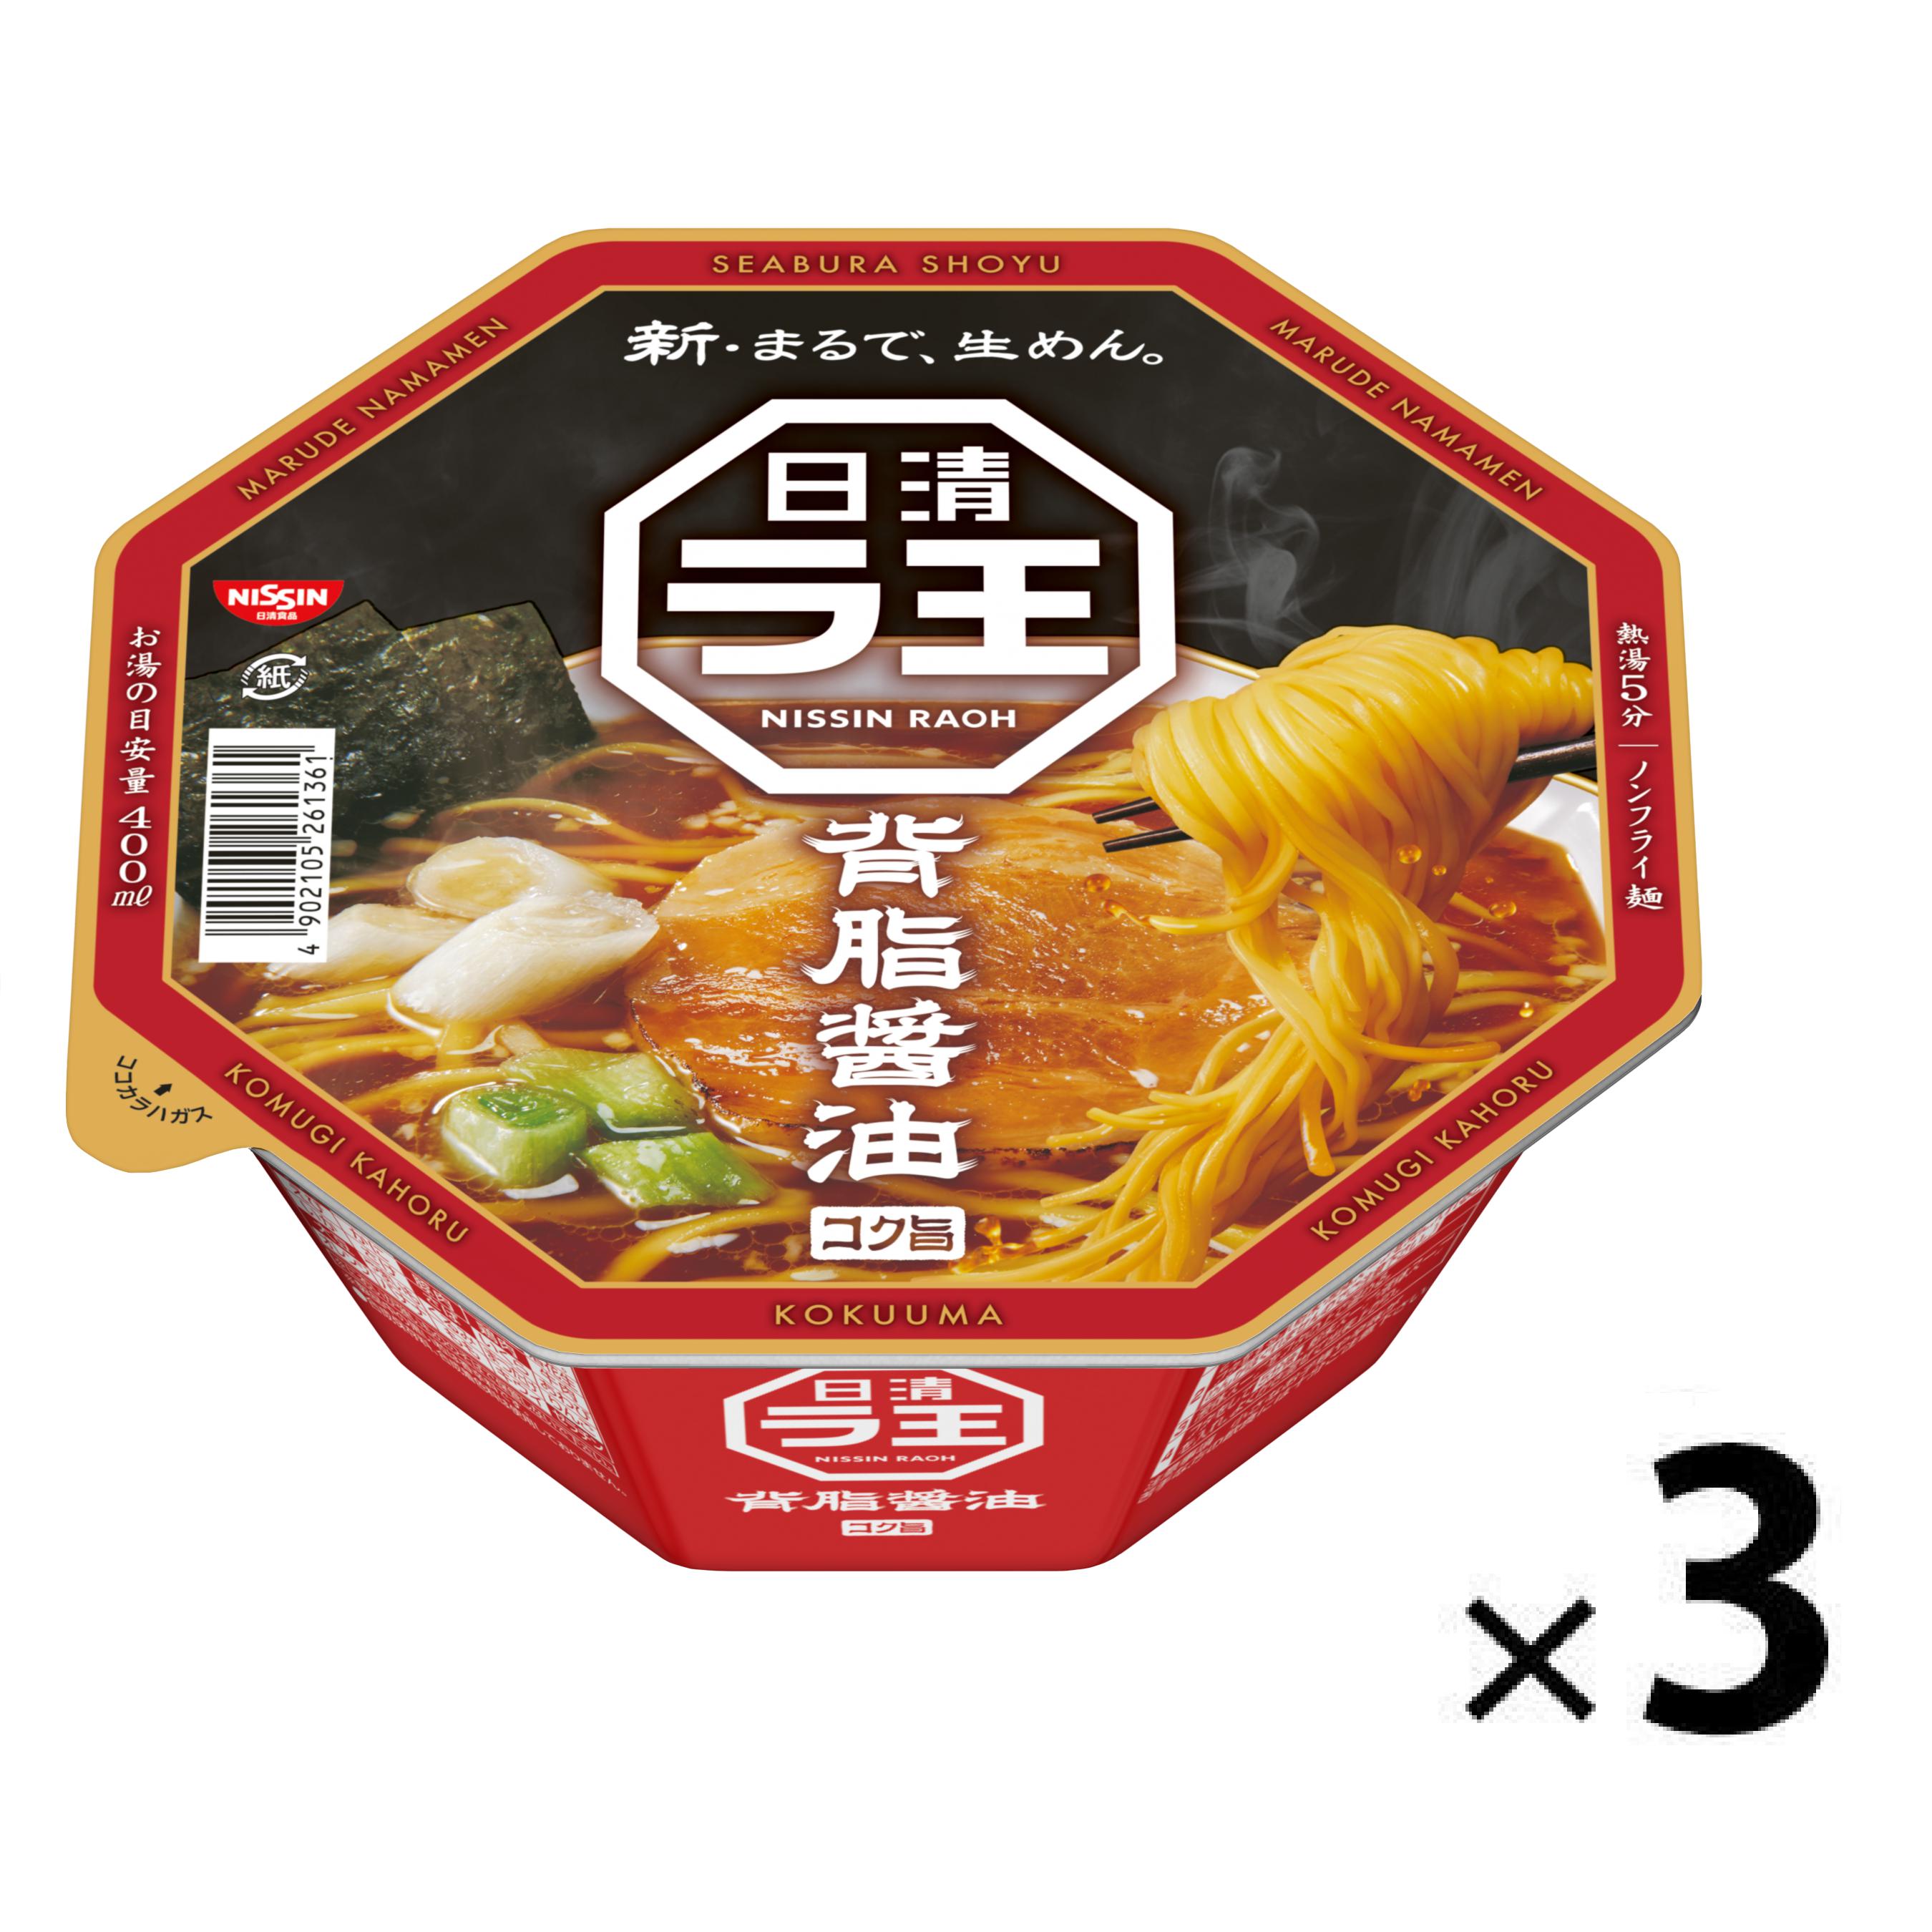 Nissin Raoh Fatback Rich Soy Sauce Instant Ramen (Pack of 3 Cups)